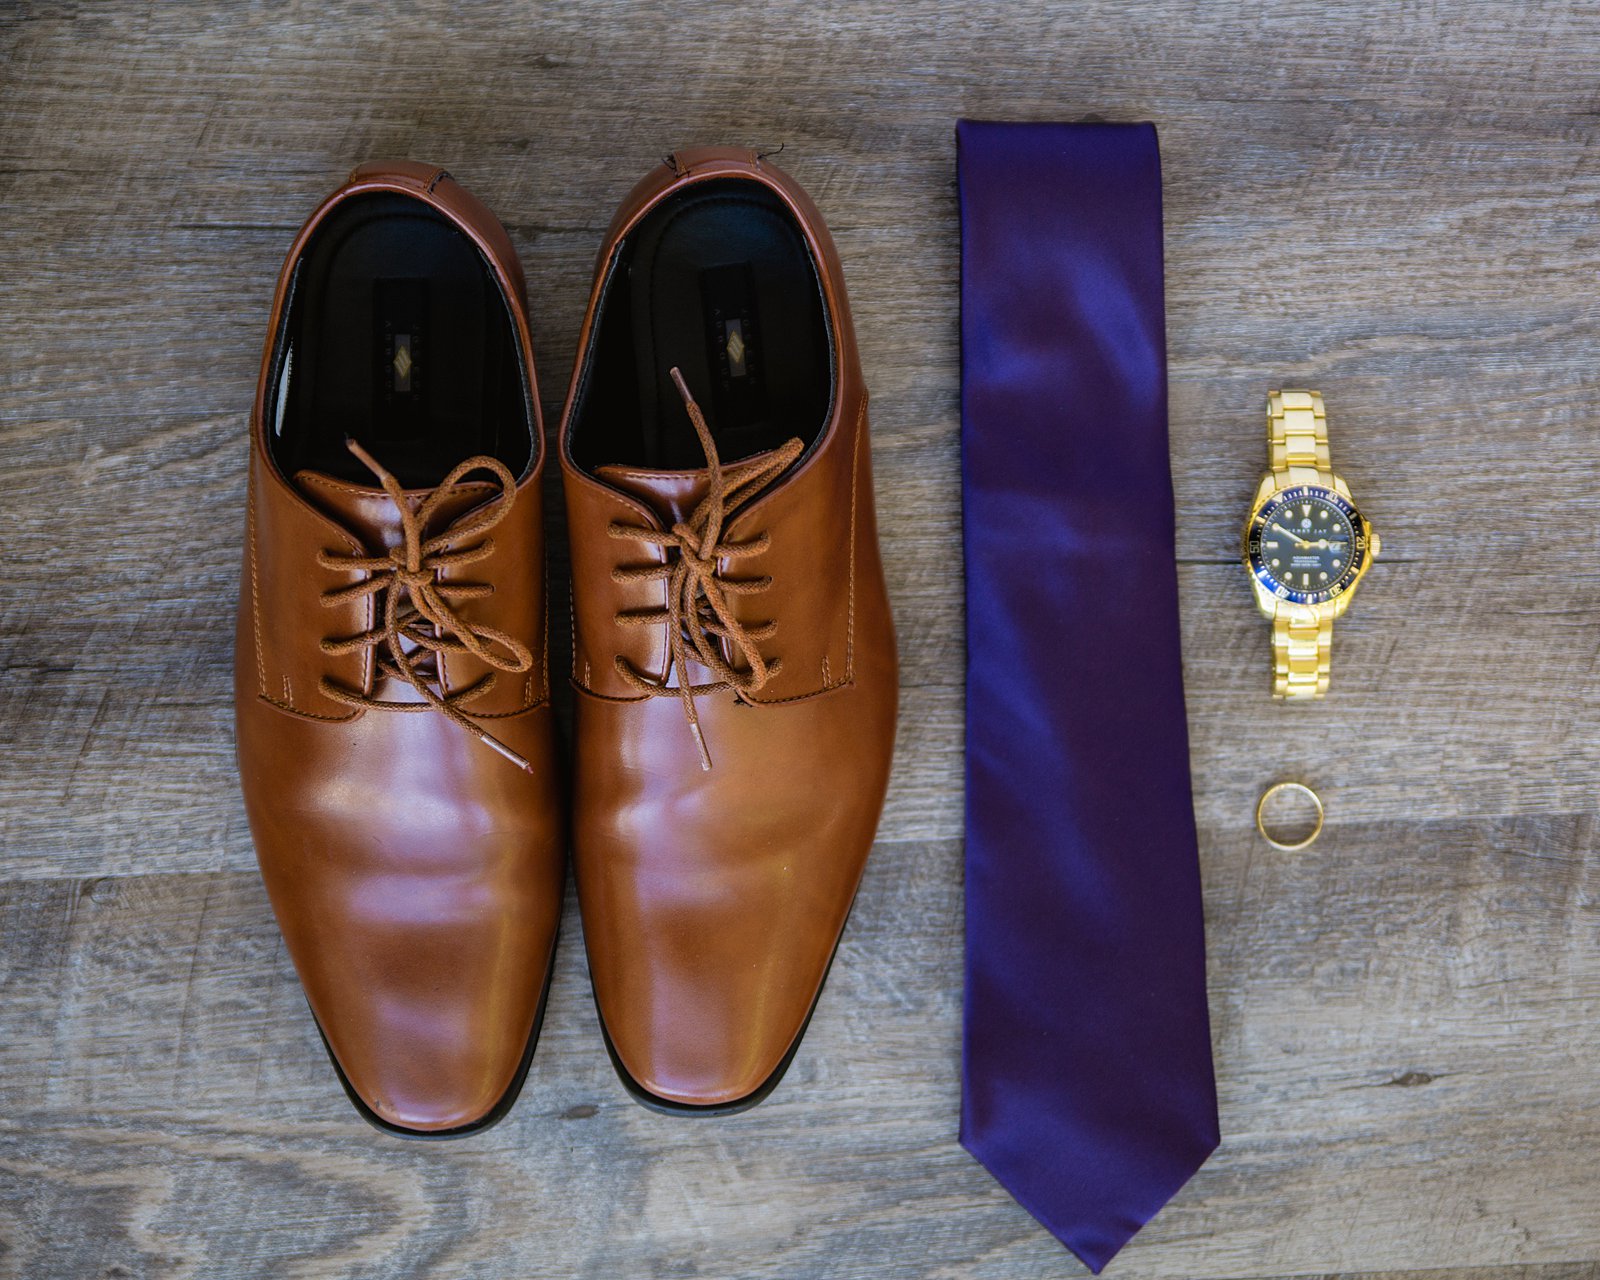 Groom's wedding day details of gold wedding ring and watch and purple tie by PMA Photography.